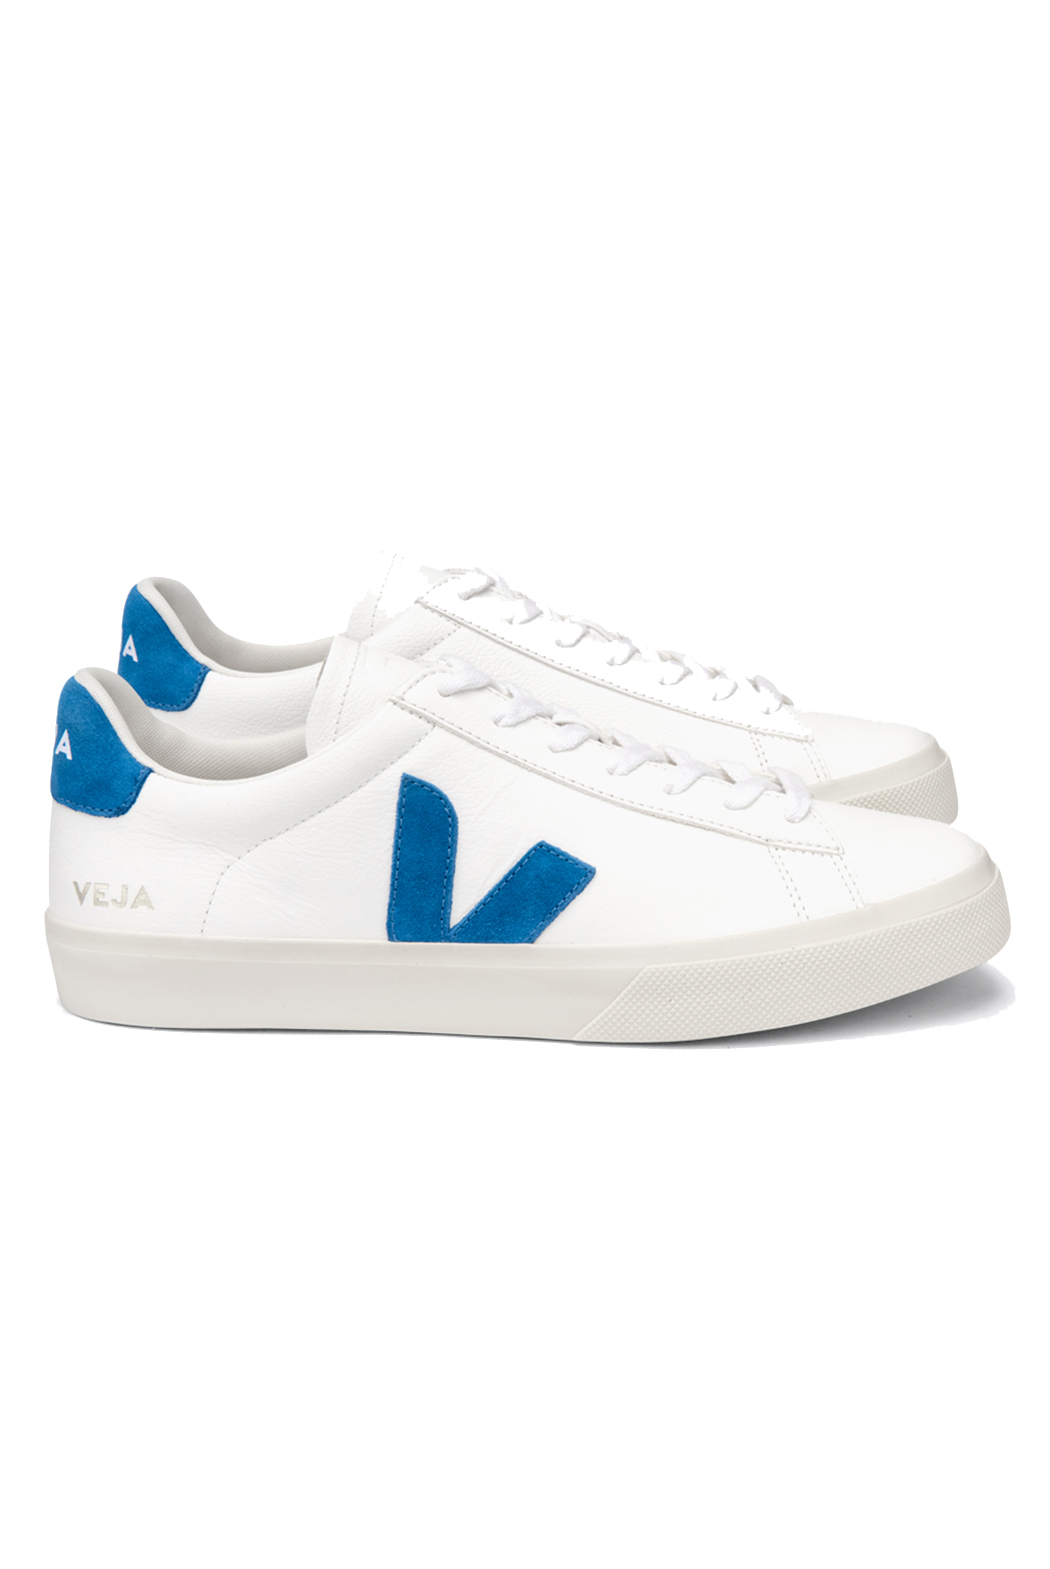 Veja Campo Leather Trainers - White Swedish Blue